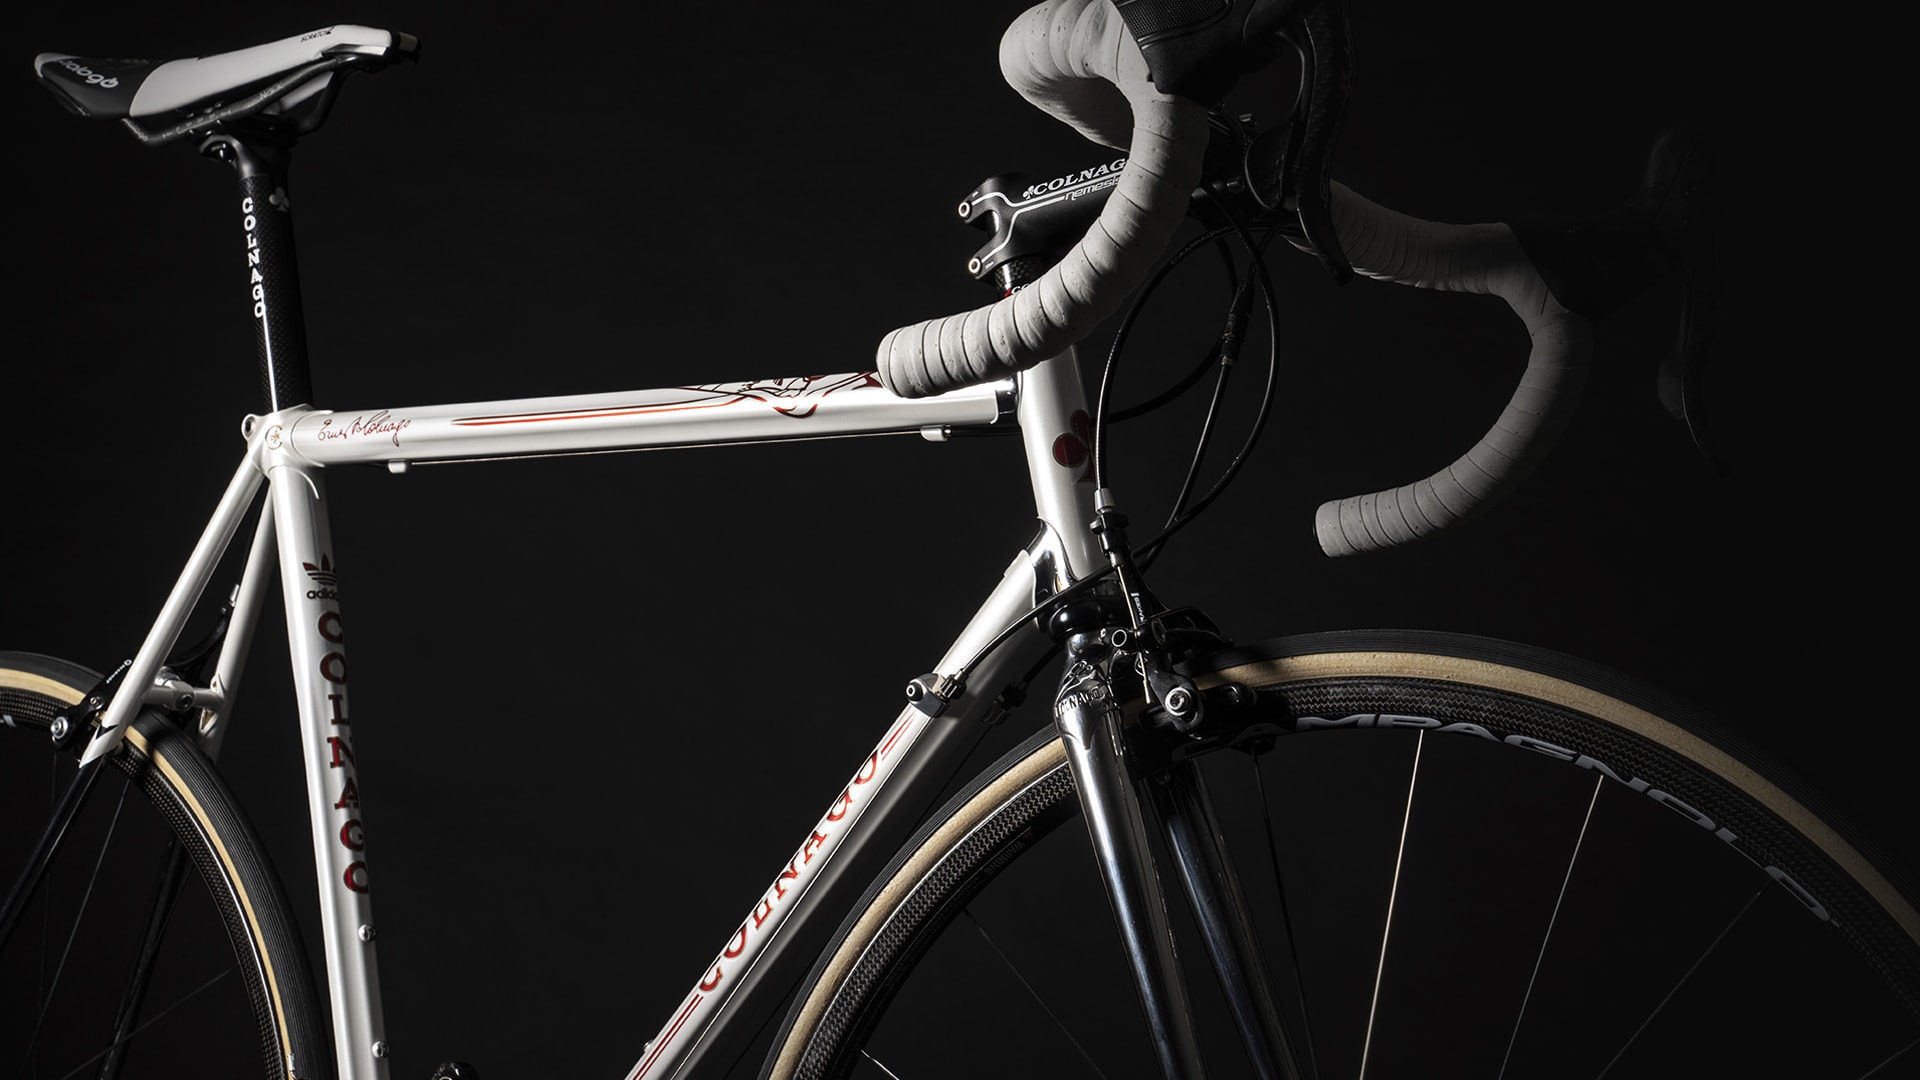 sum squeeze Drastic Adidas x Colnago x Size? collaboration continues w/ Limited Colnago Master  frame - Bikerumor